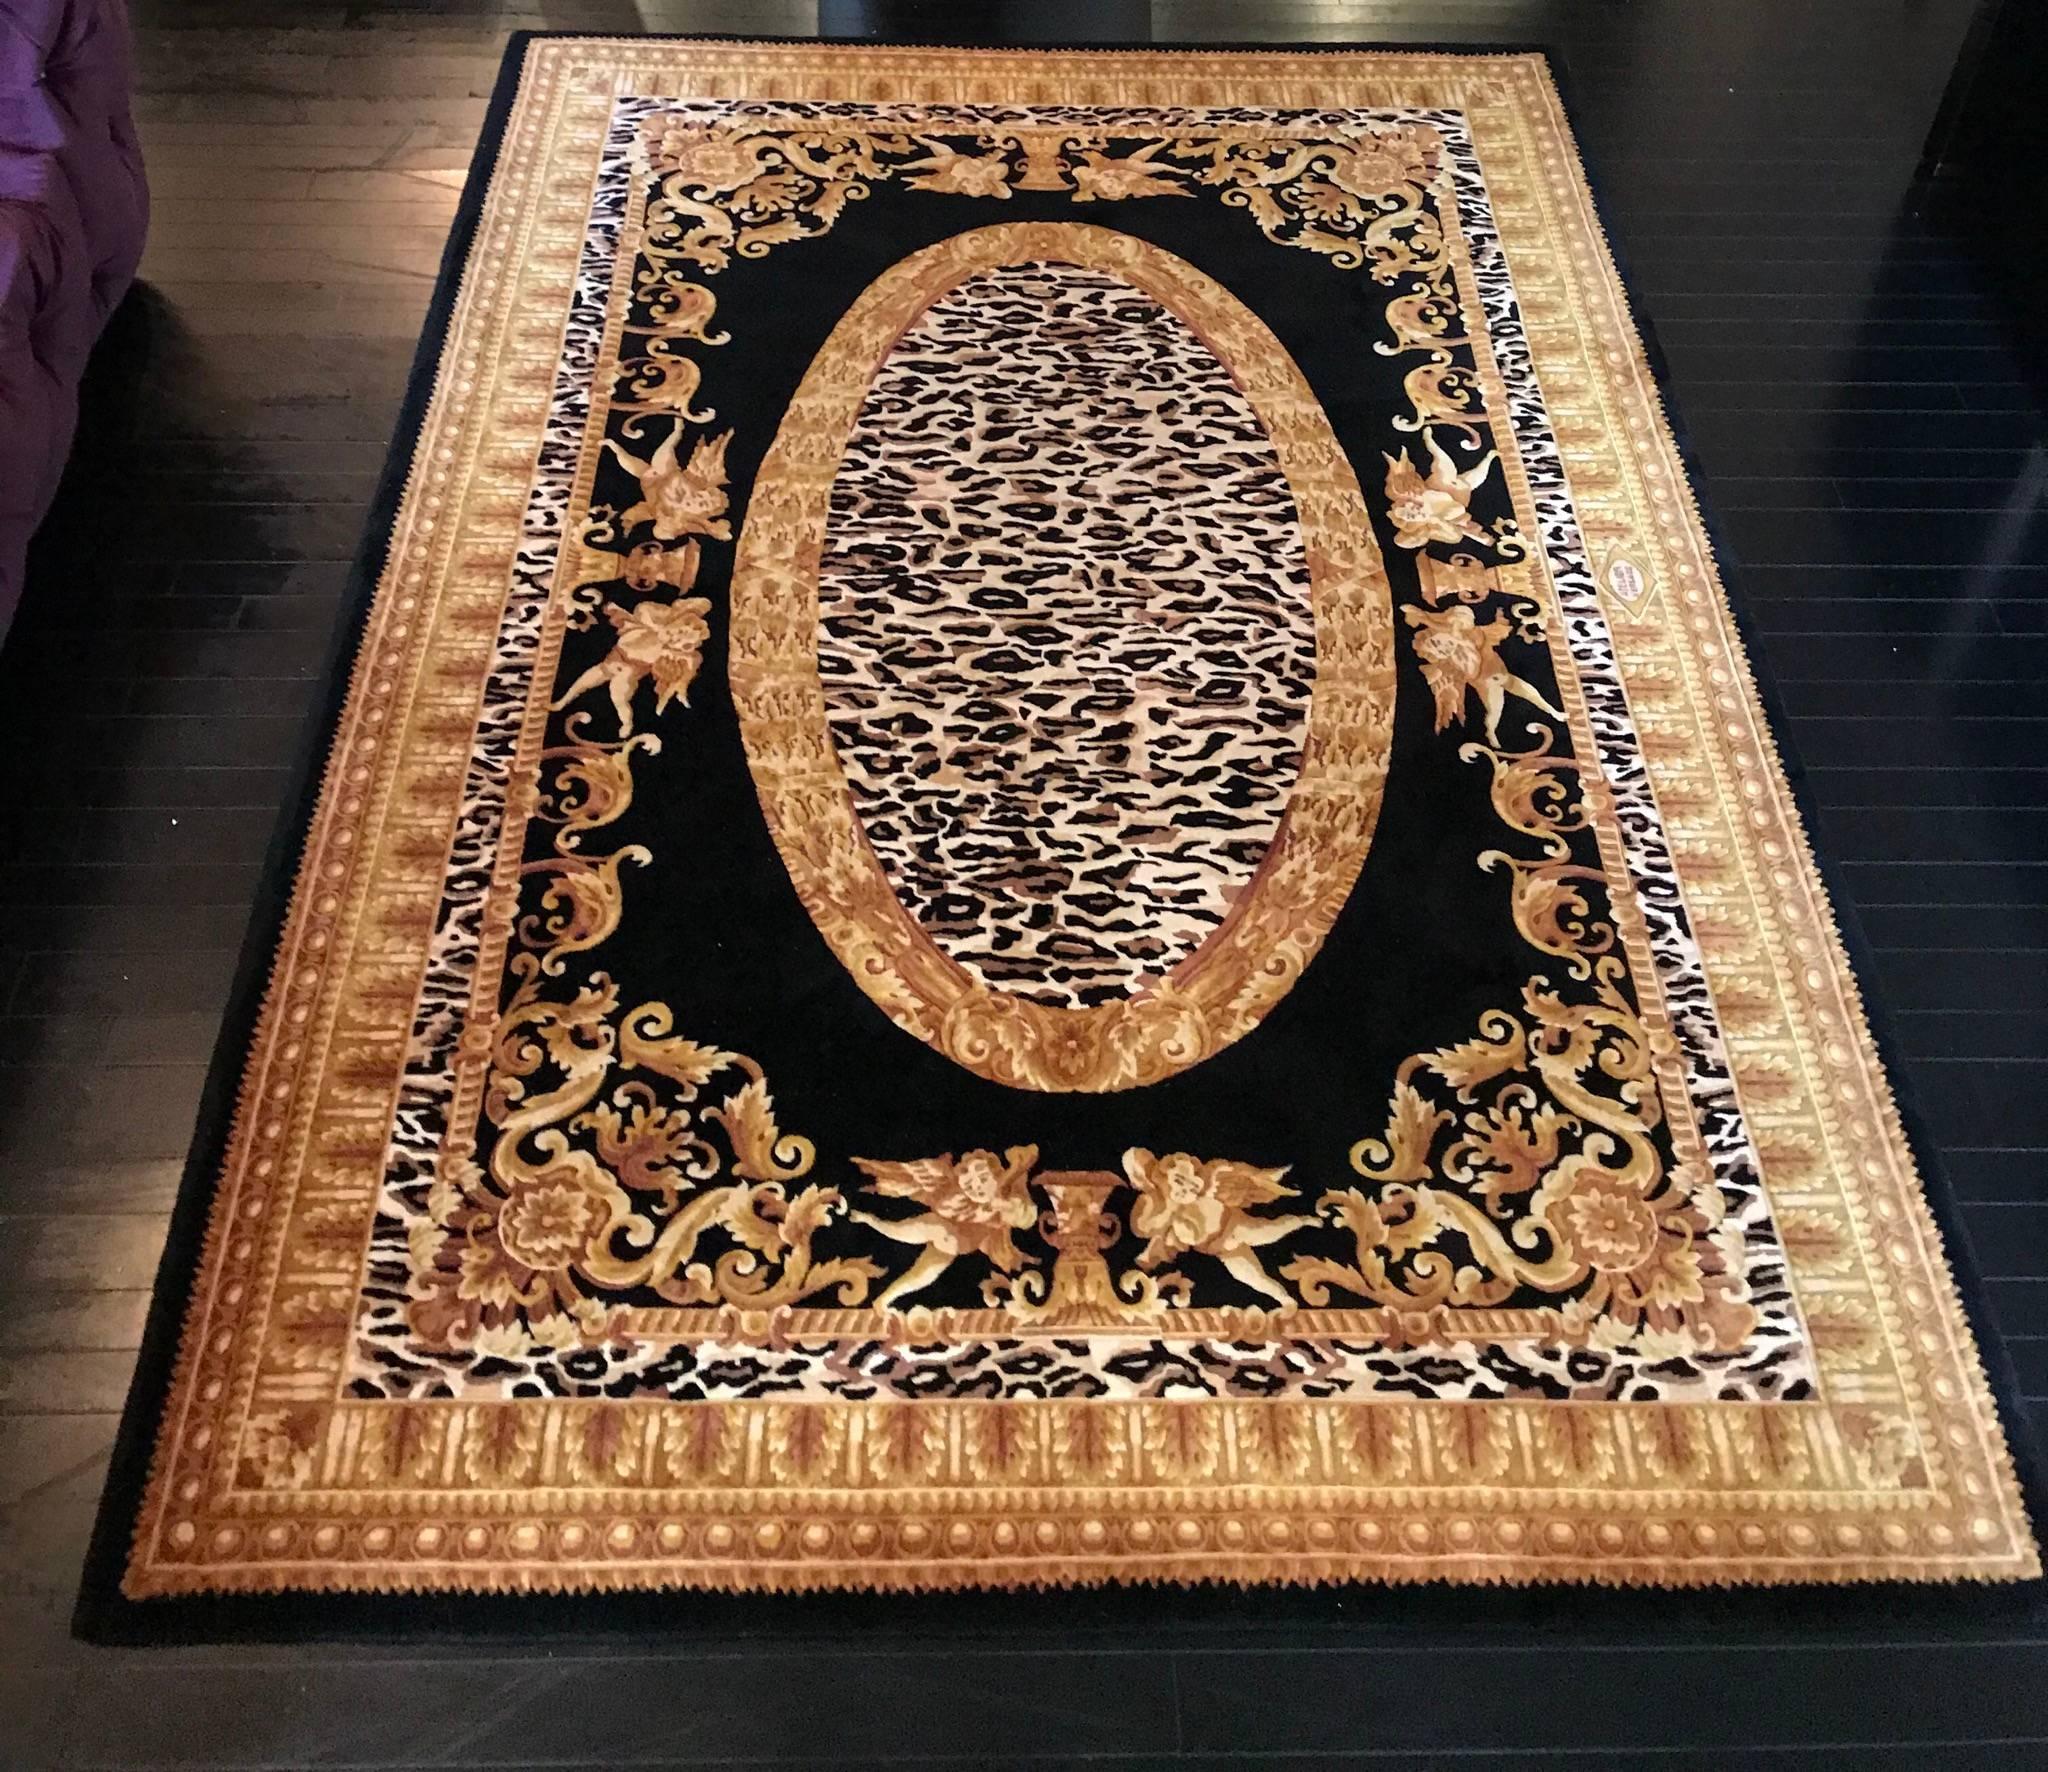 A vintage Gianni Versace Home Signature wool rug. Baroque gold tones with leopard print detail. Entitled 